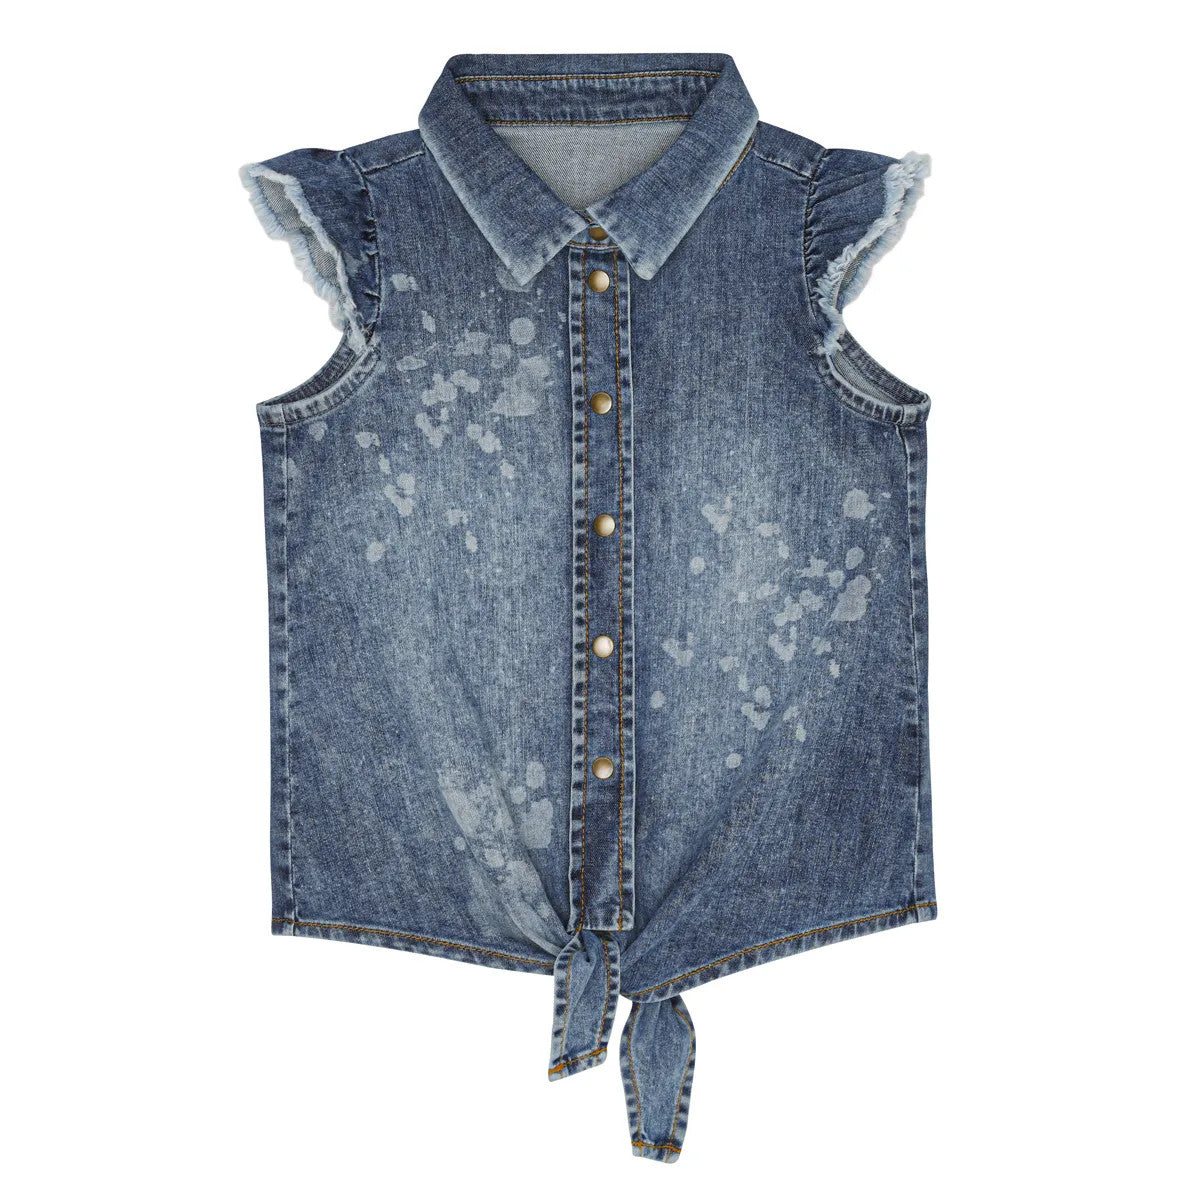 Little Hedonist denim with bleached stains knotted sleeveless shirt with bleached stains. Sustainable kids fashion made from our best organic cotton denim. Superfashion for girls!